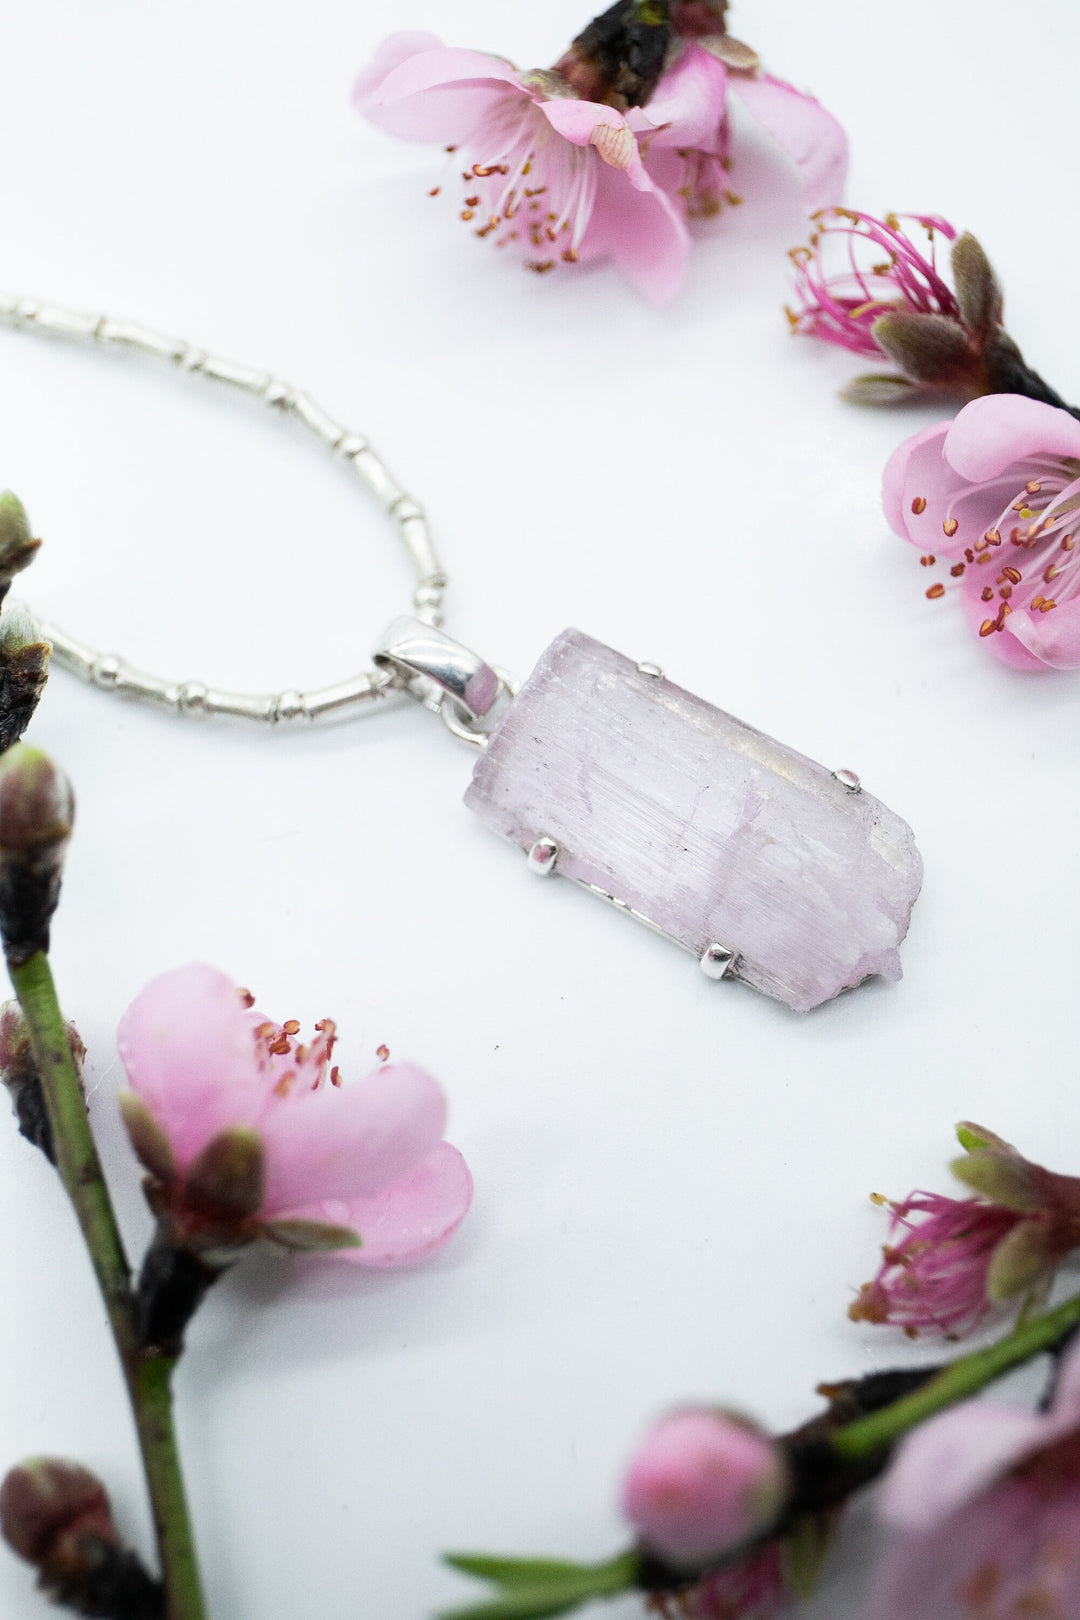 Lovely Raw Pink Kunzite Pendant in 92.5% Sterling Silver Claw Setting with Thai Hill Tribe Silver Chain - Gemstone Pendant - Kunzite Jewelry